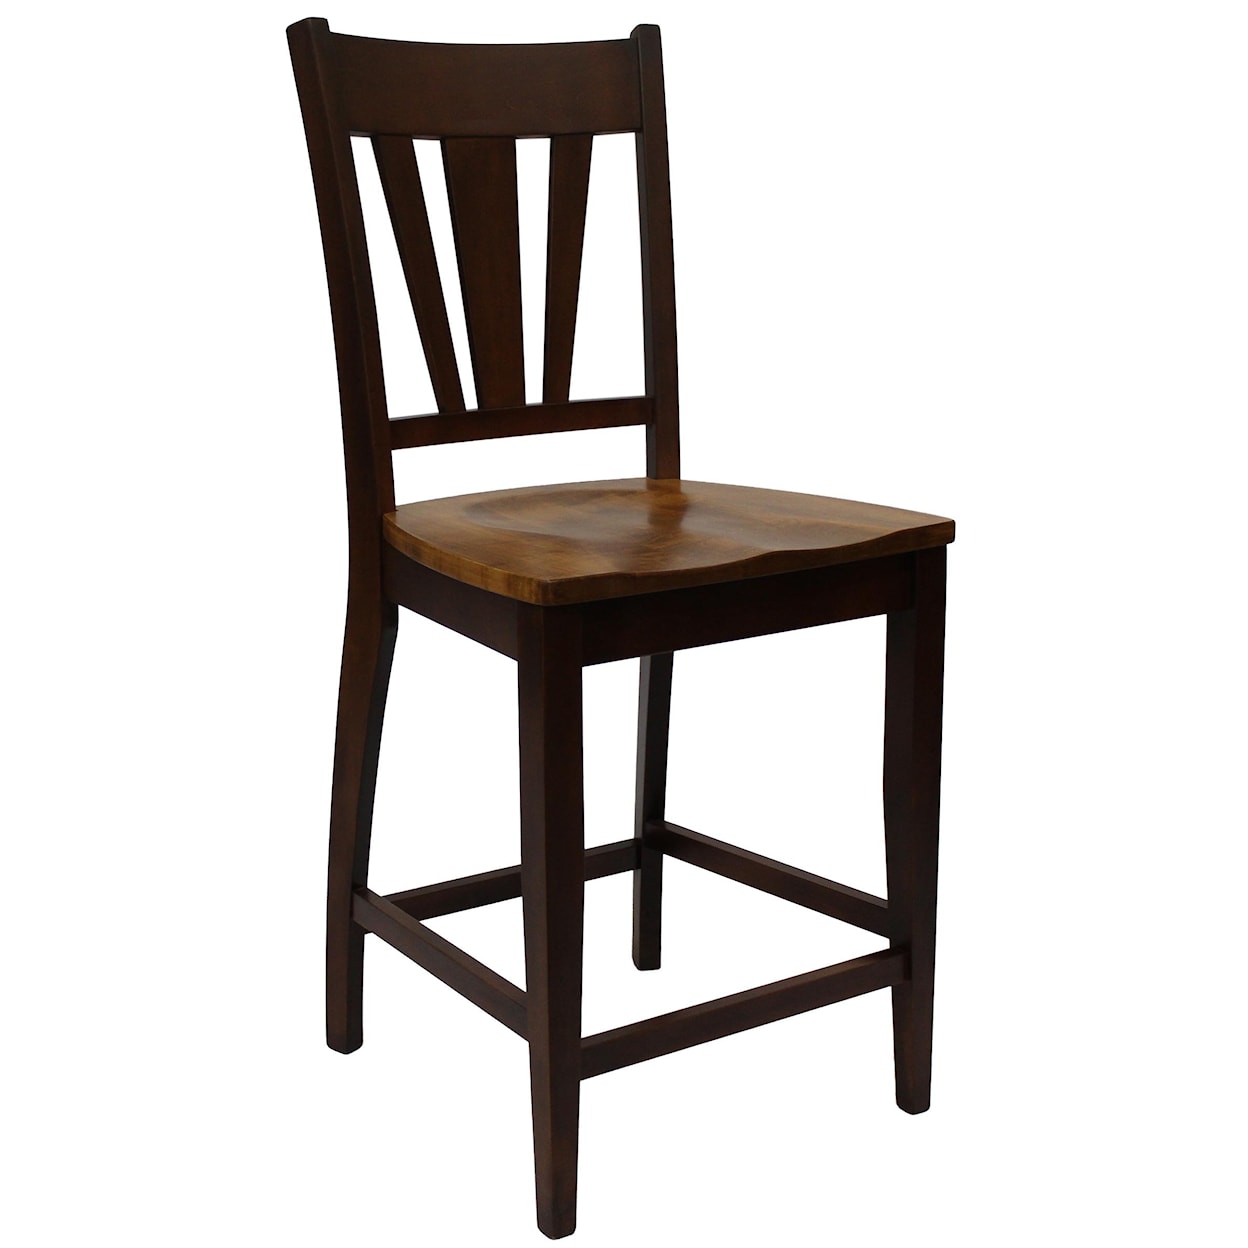 L.J. Gascho Furniture Larkin Gathering Table and Chair Set